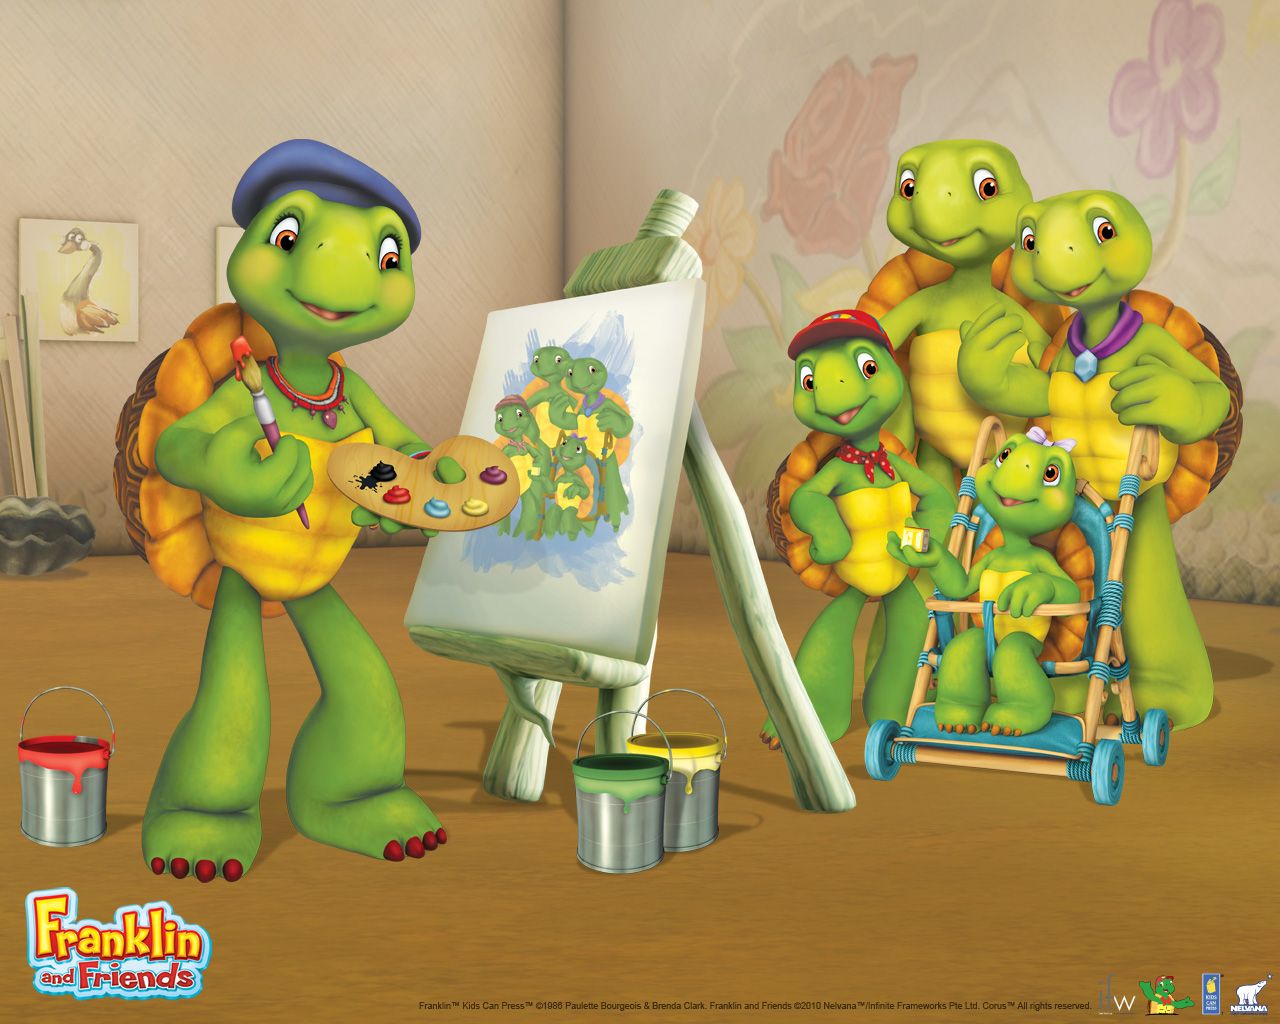 Content Assets En Ca Extras Wallpaper Wallpaper Family 1280x1024.j. Franklin The Turtle, Franklin And Friends, Childhood Tv Shows